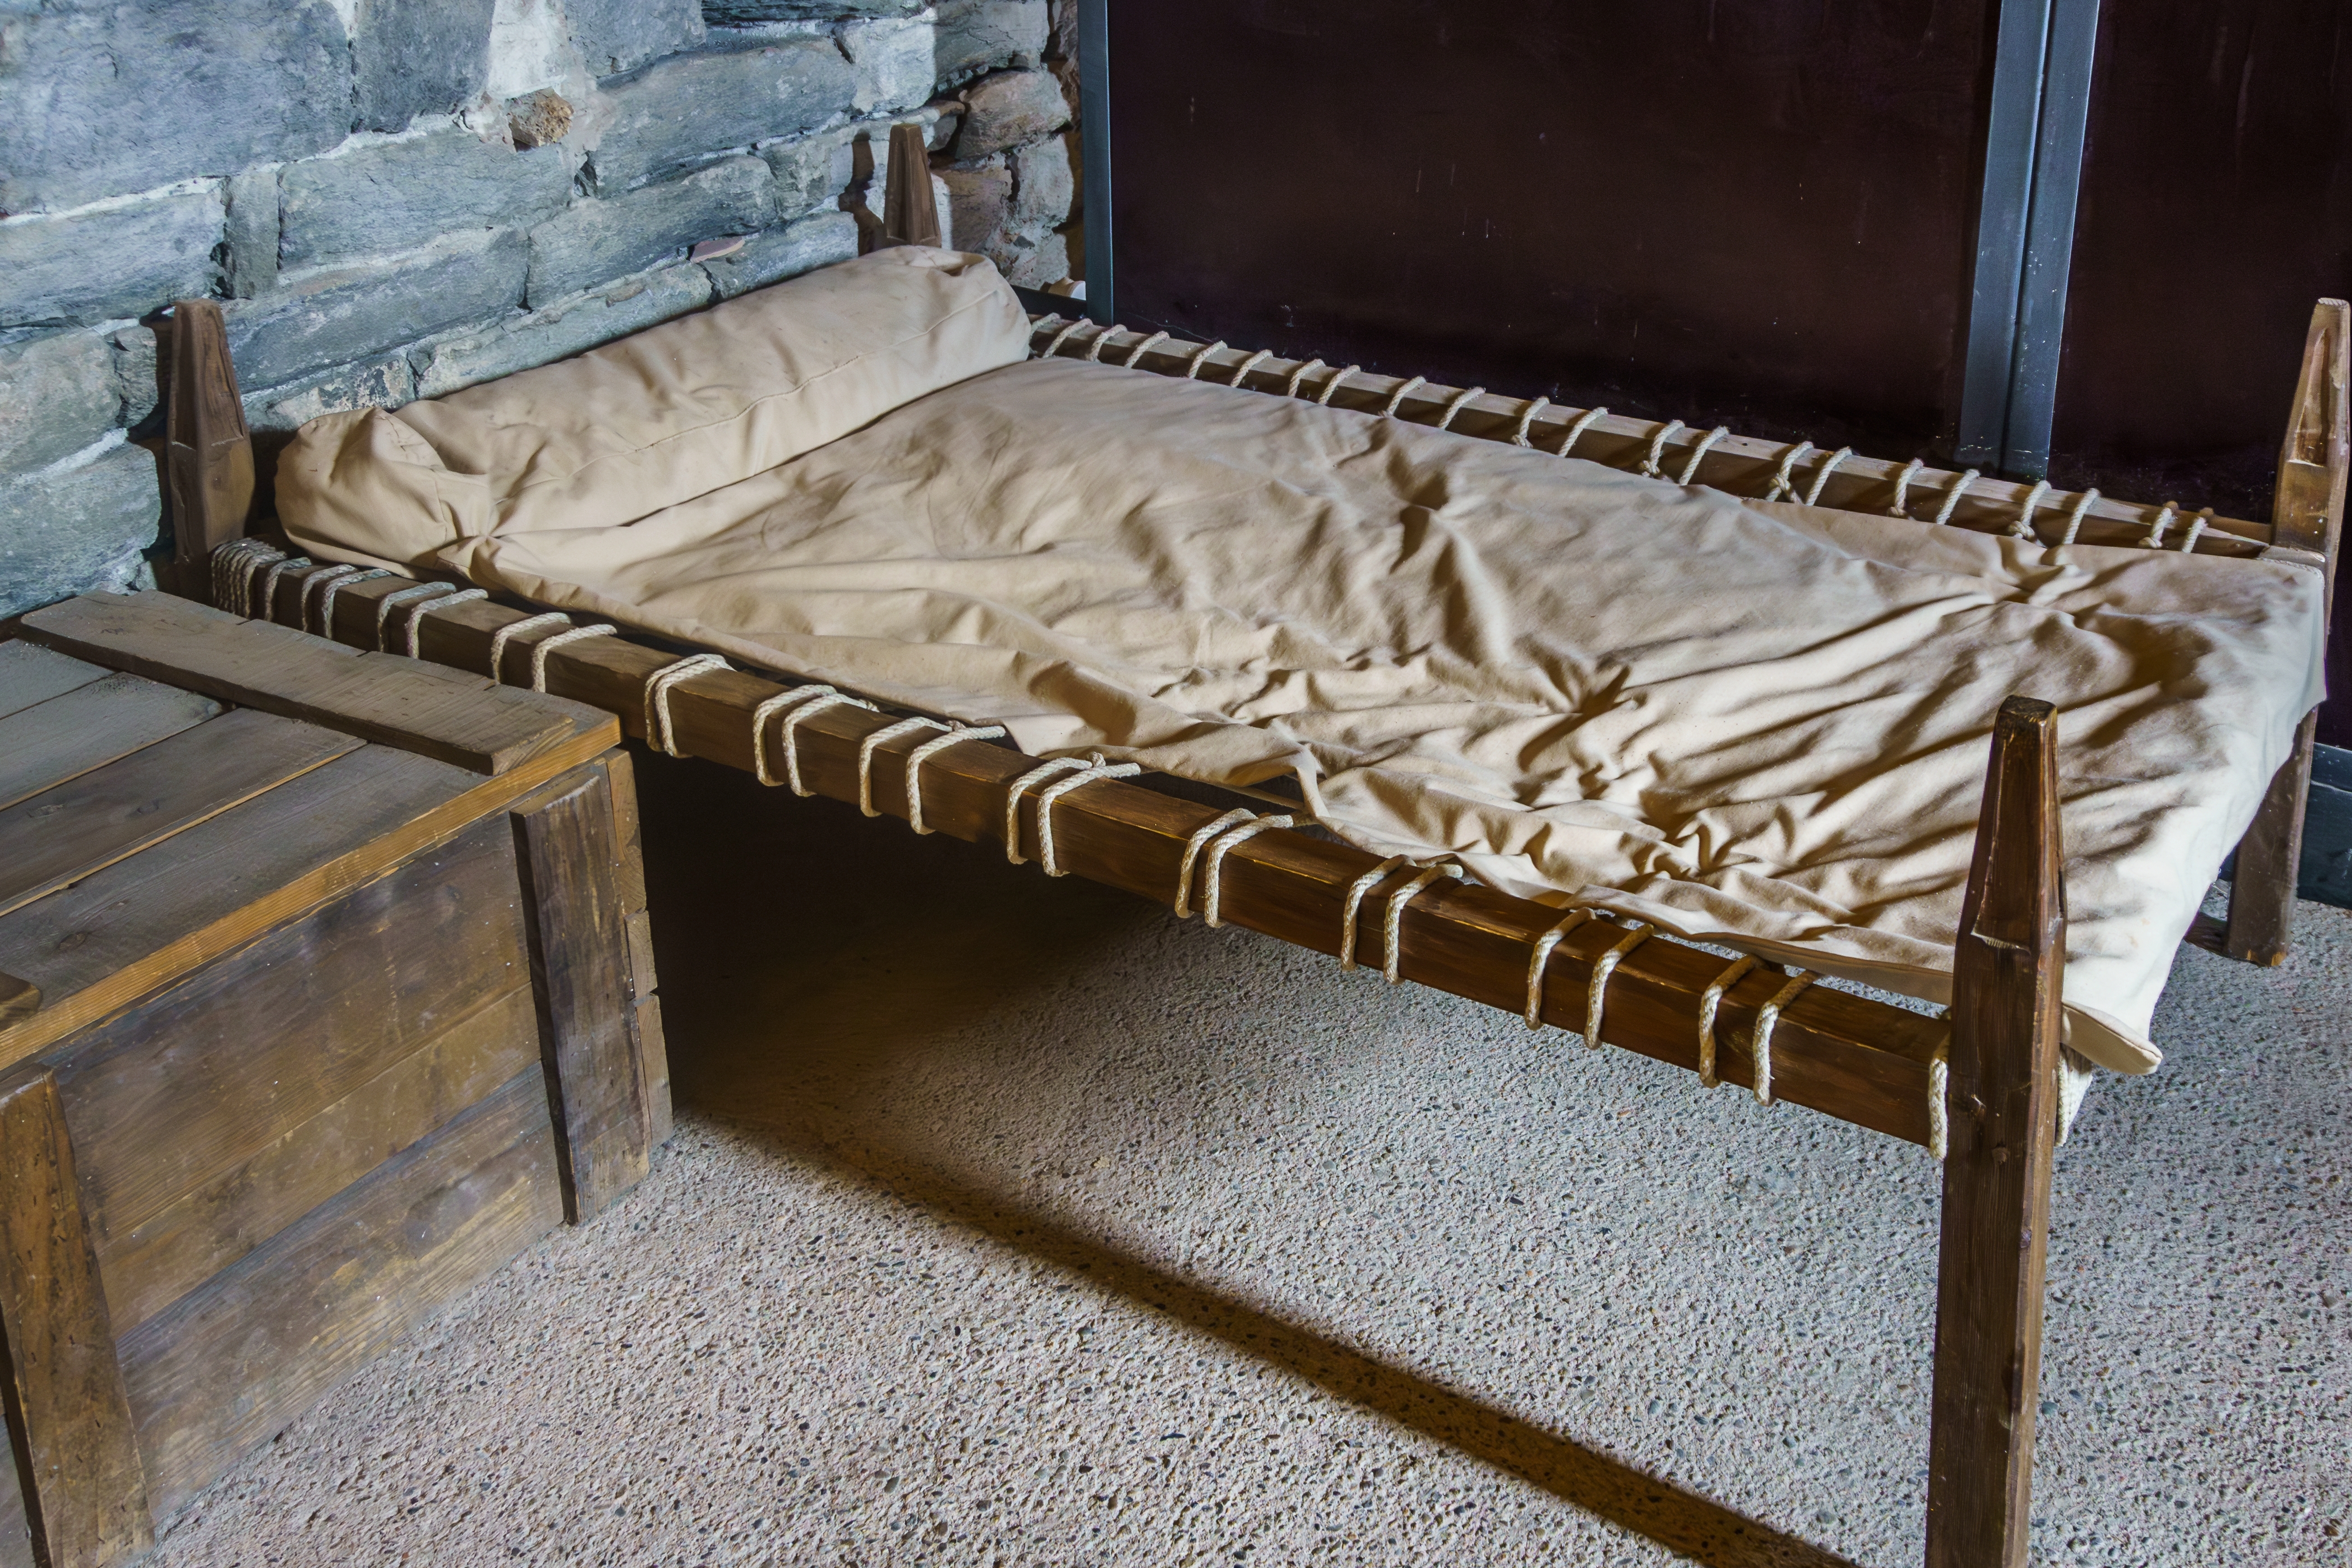 A very old bed with desk